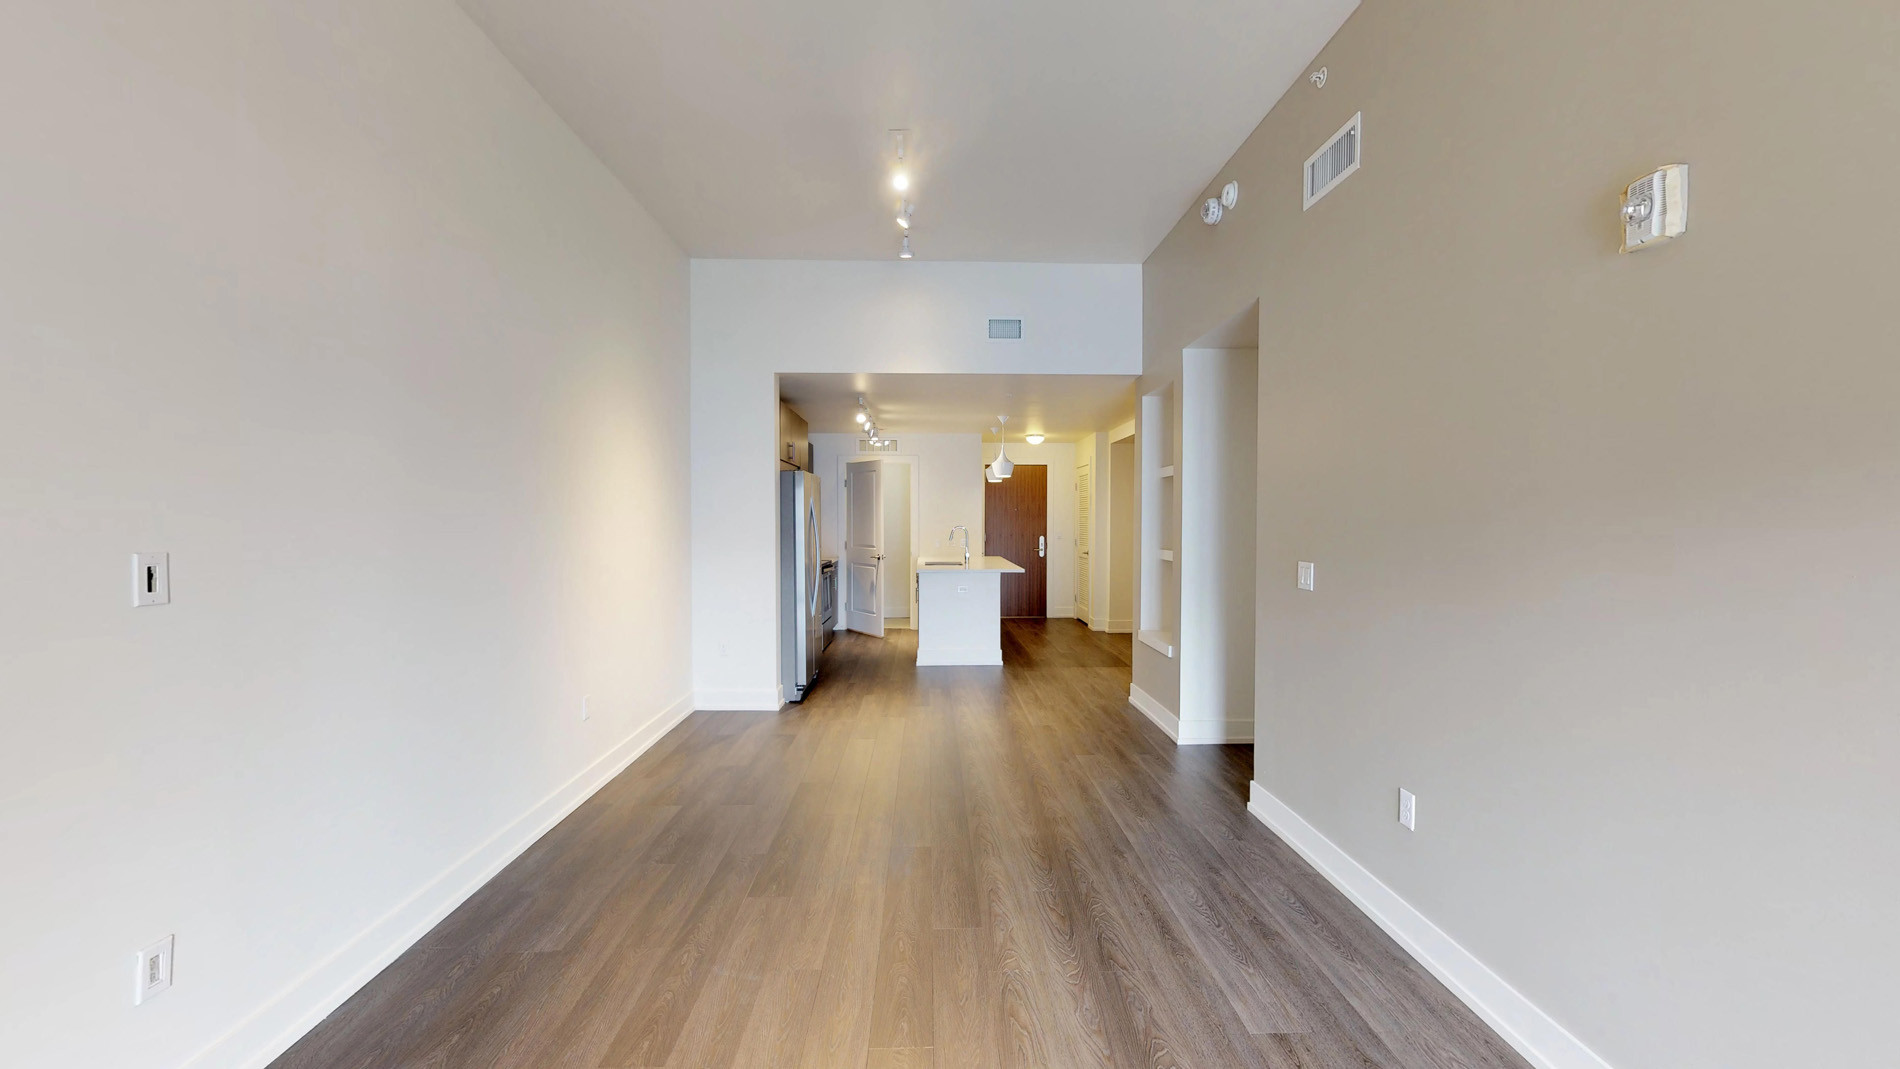 27 Lovely Hardwood Floor Installation Cost Denver 2024 free download hardwood floor installation cost denver of apartments and pricing for steele creek denver within 293bc7f4 548b 2c0a e36d fbcb2d3806db